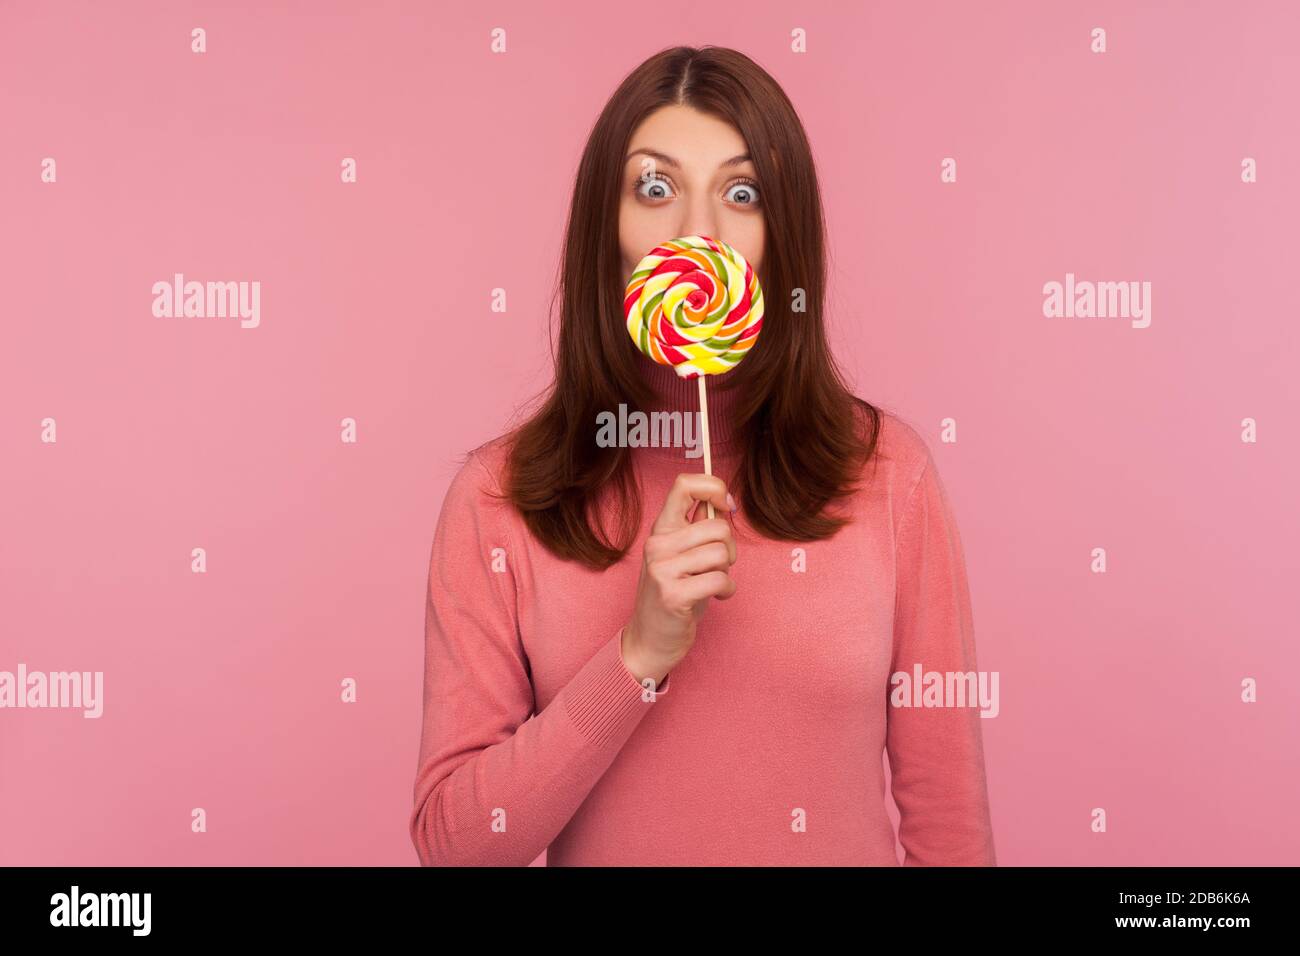 Surprised brunette woman in pink sweater licking lollipop and looking at camera with amazed expression. Indoor studio shot isolated on pink background Stock Photo